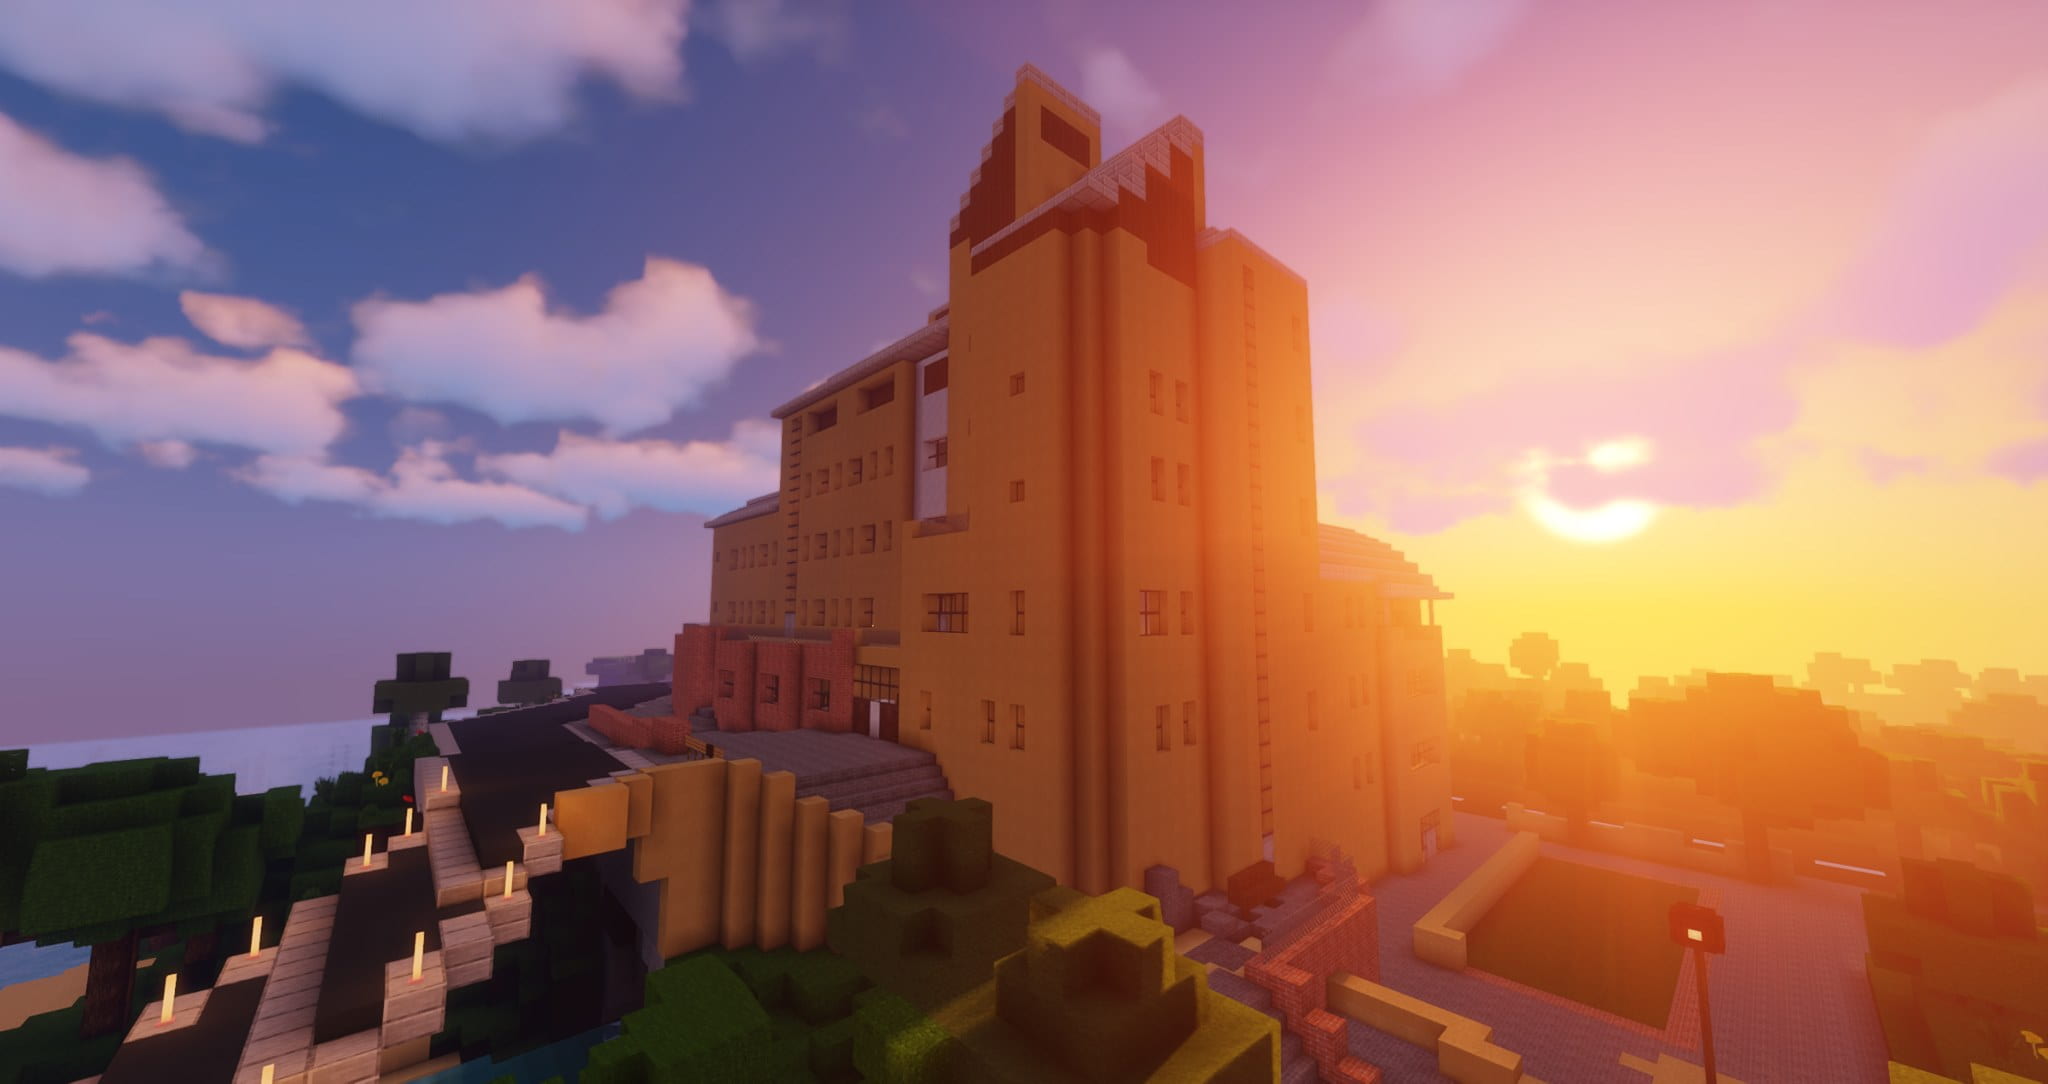 The Merchant Venturers Building (home of Computer Science at the University of Bristol) in Minecraft